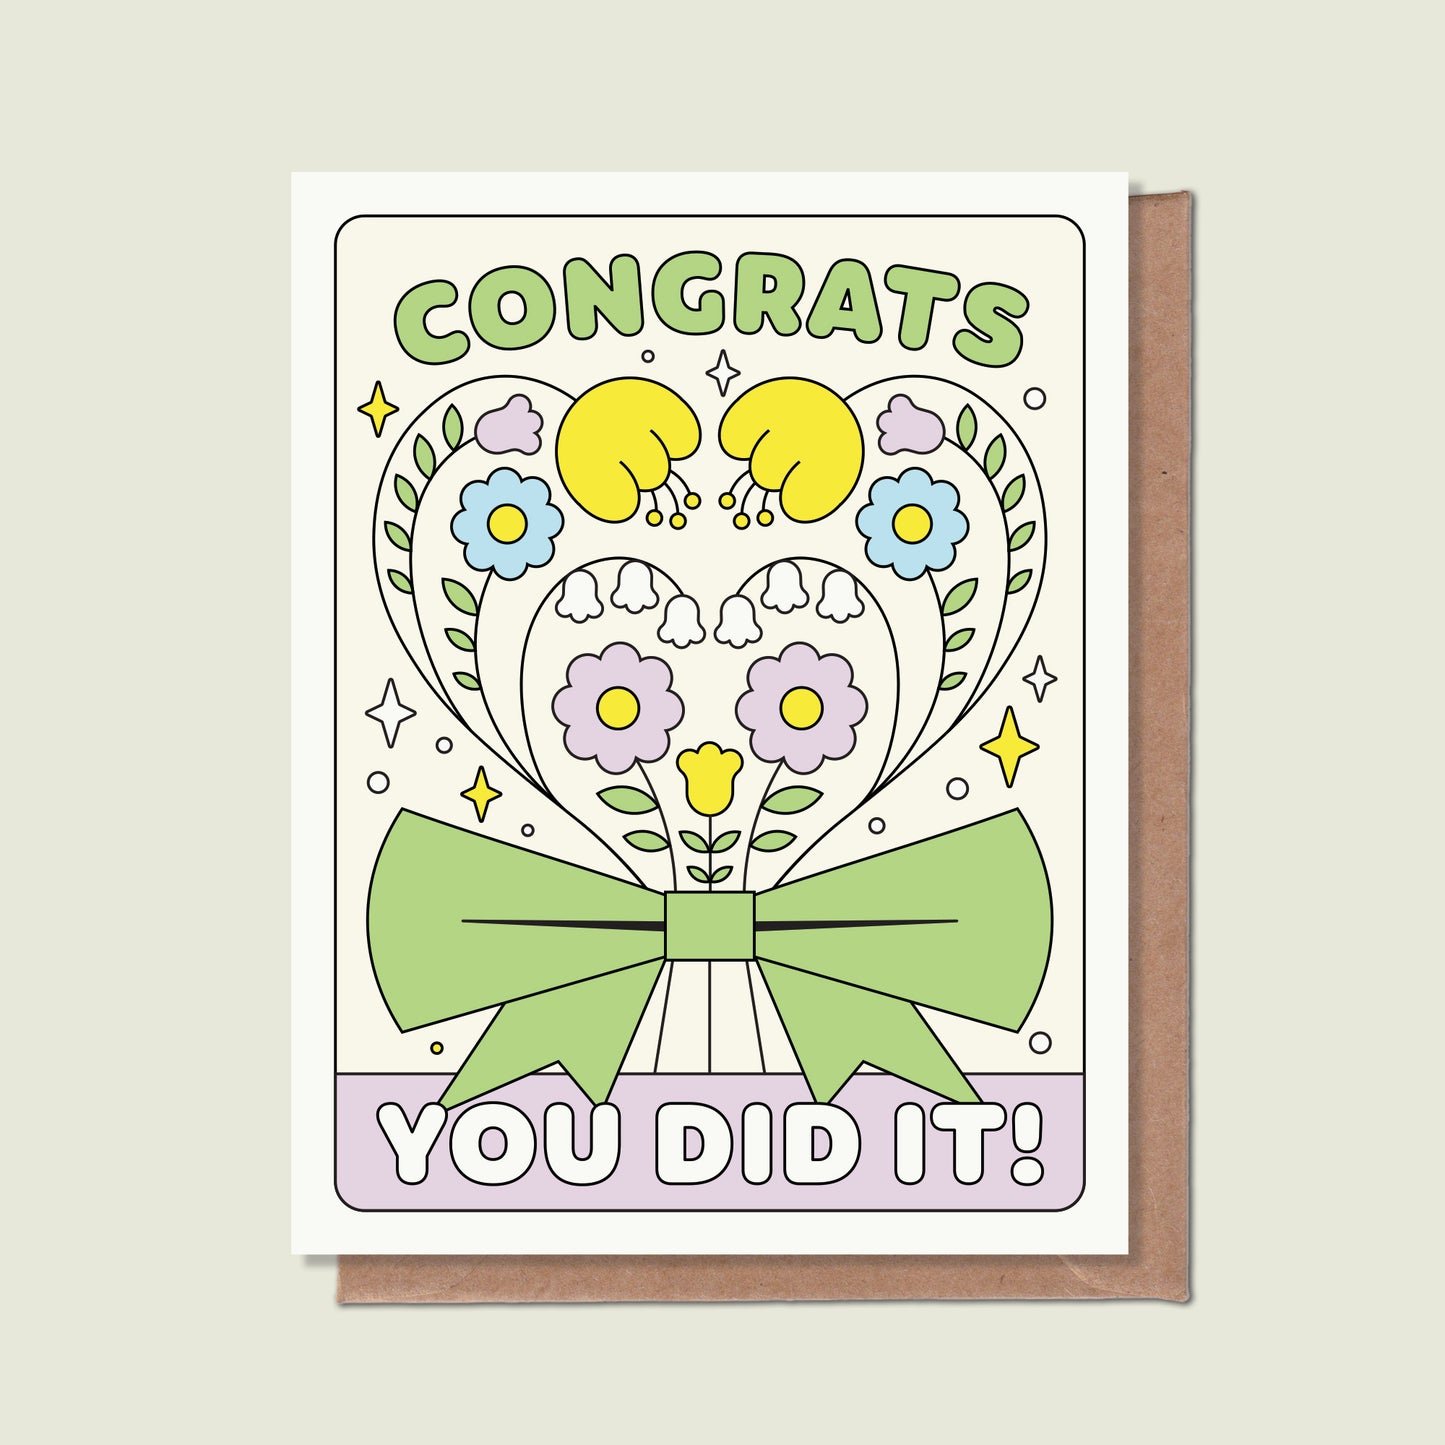 Congrats, You Did It Greeting Card